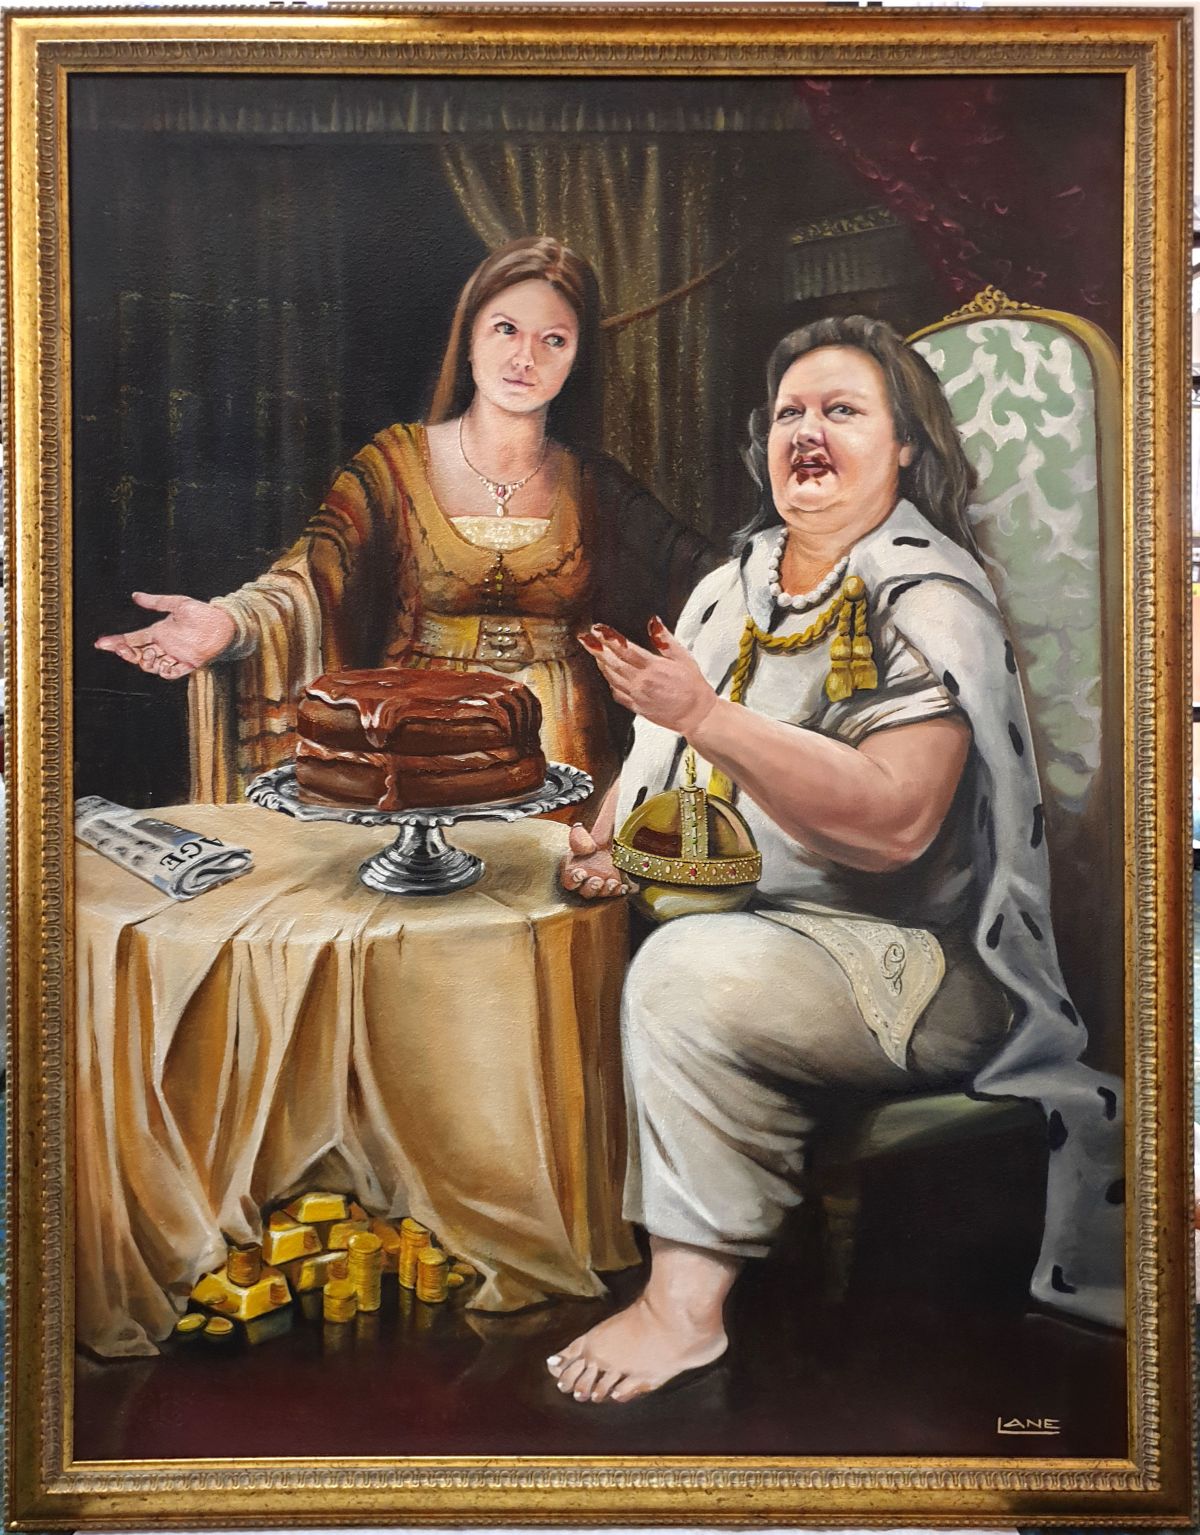 A painting of two women, one sitting at a table eating cake